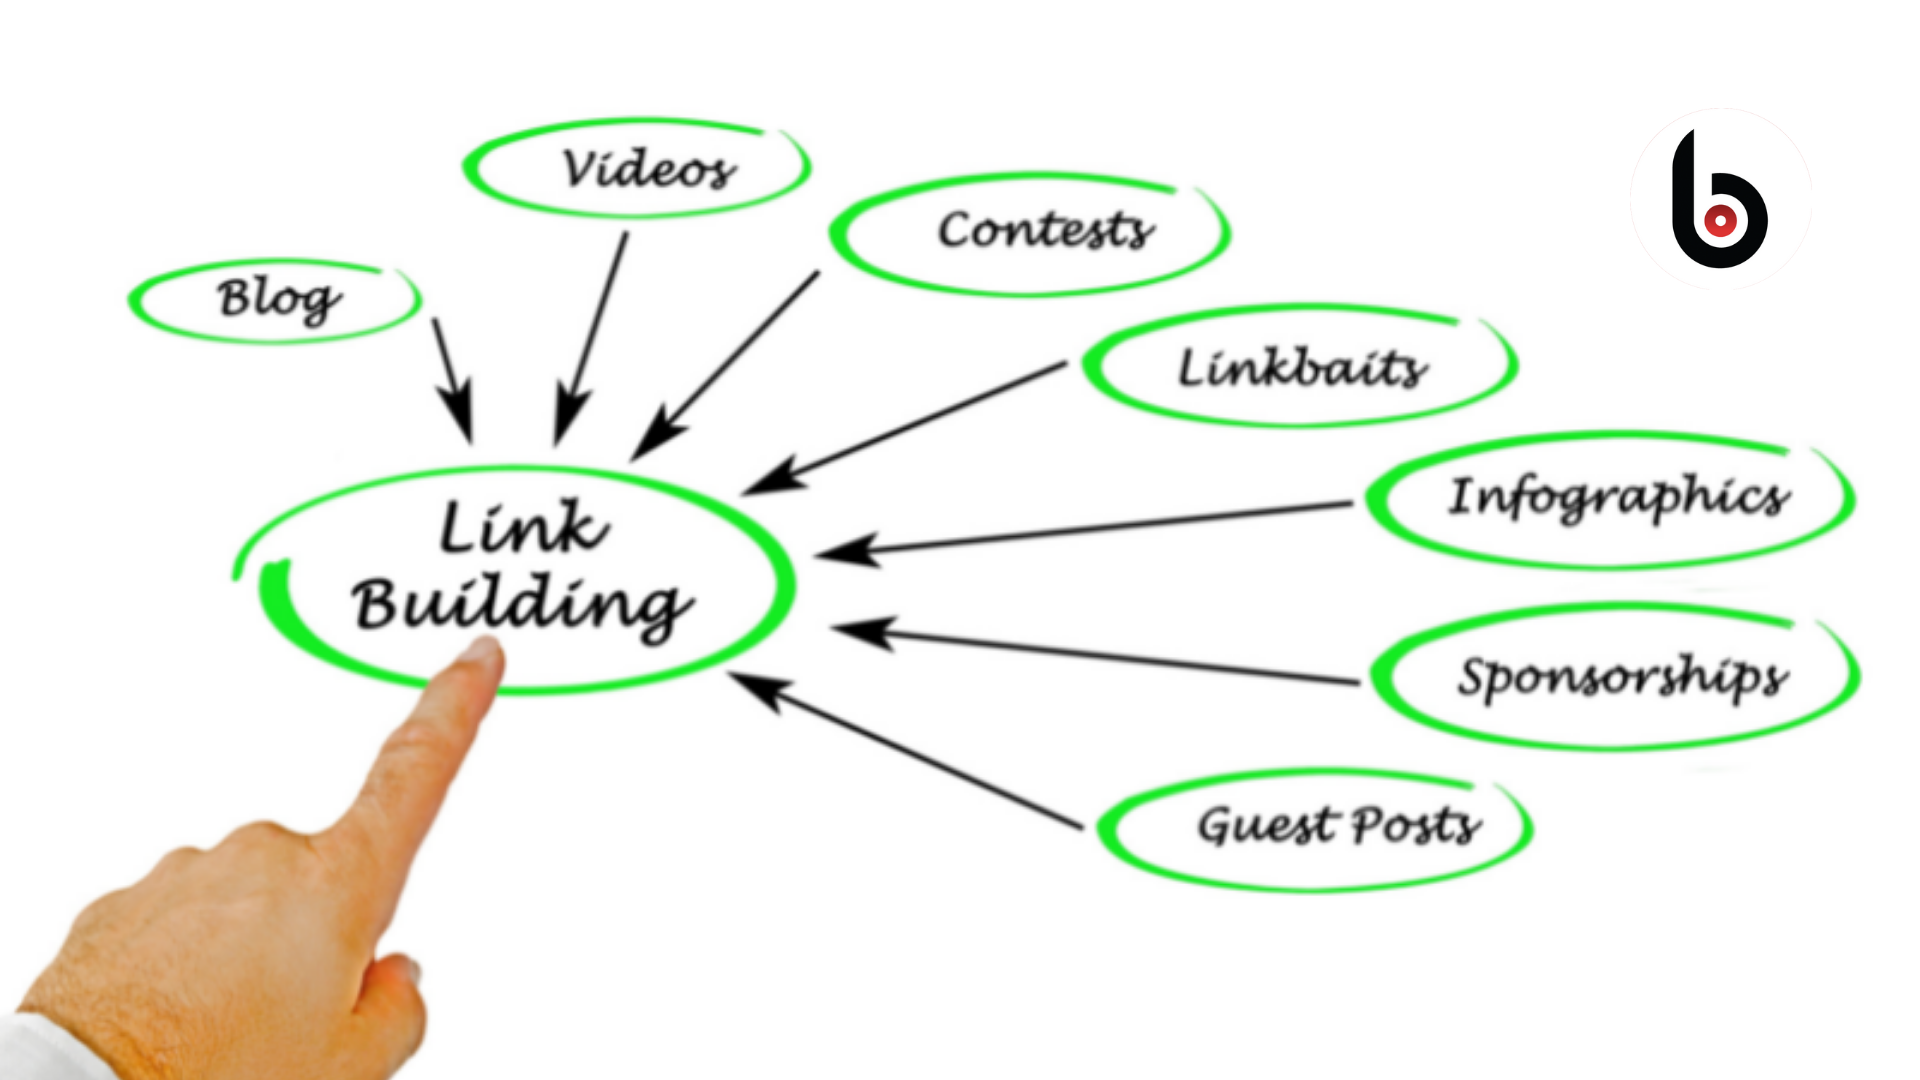 Link-building helps your brand earn trust in Google and show up at the top of search engine results.